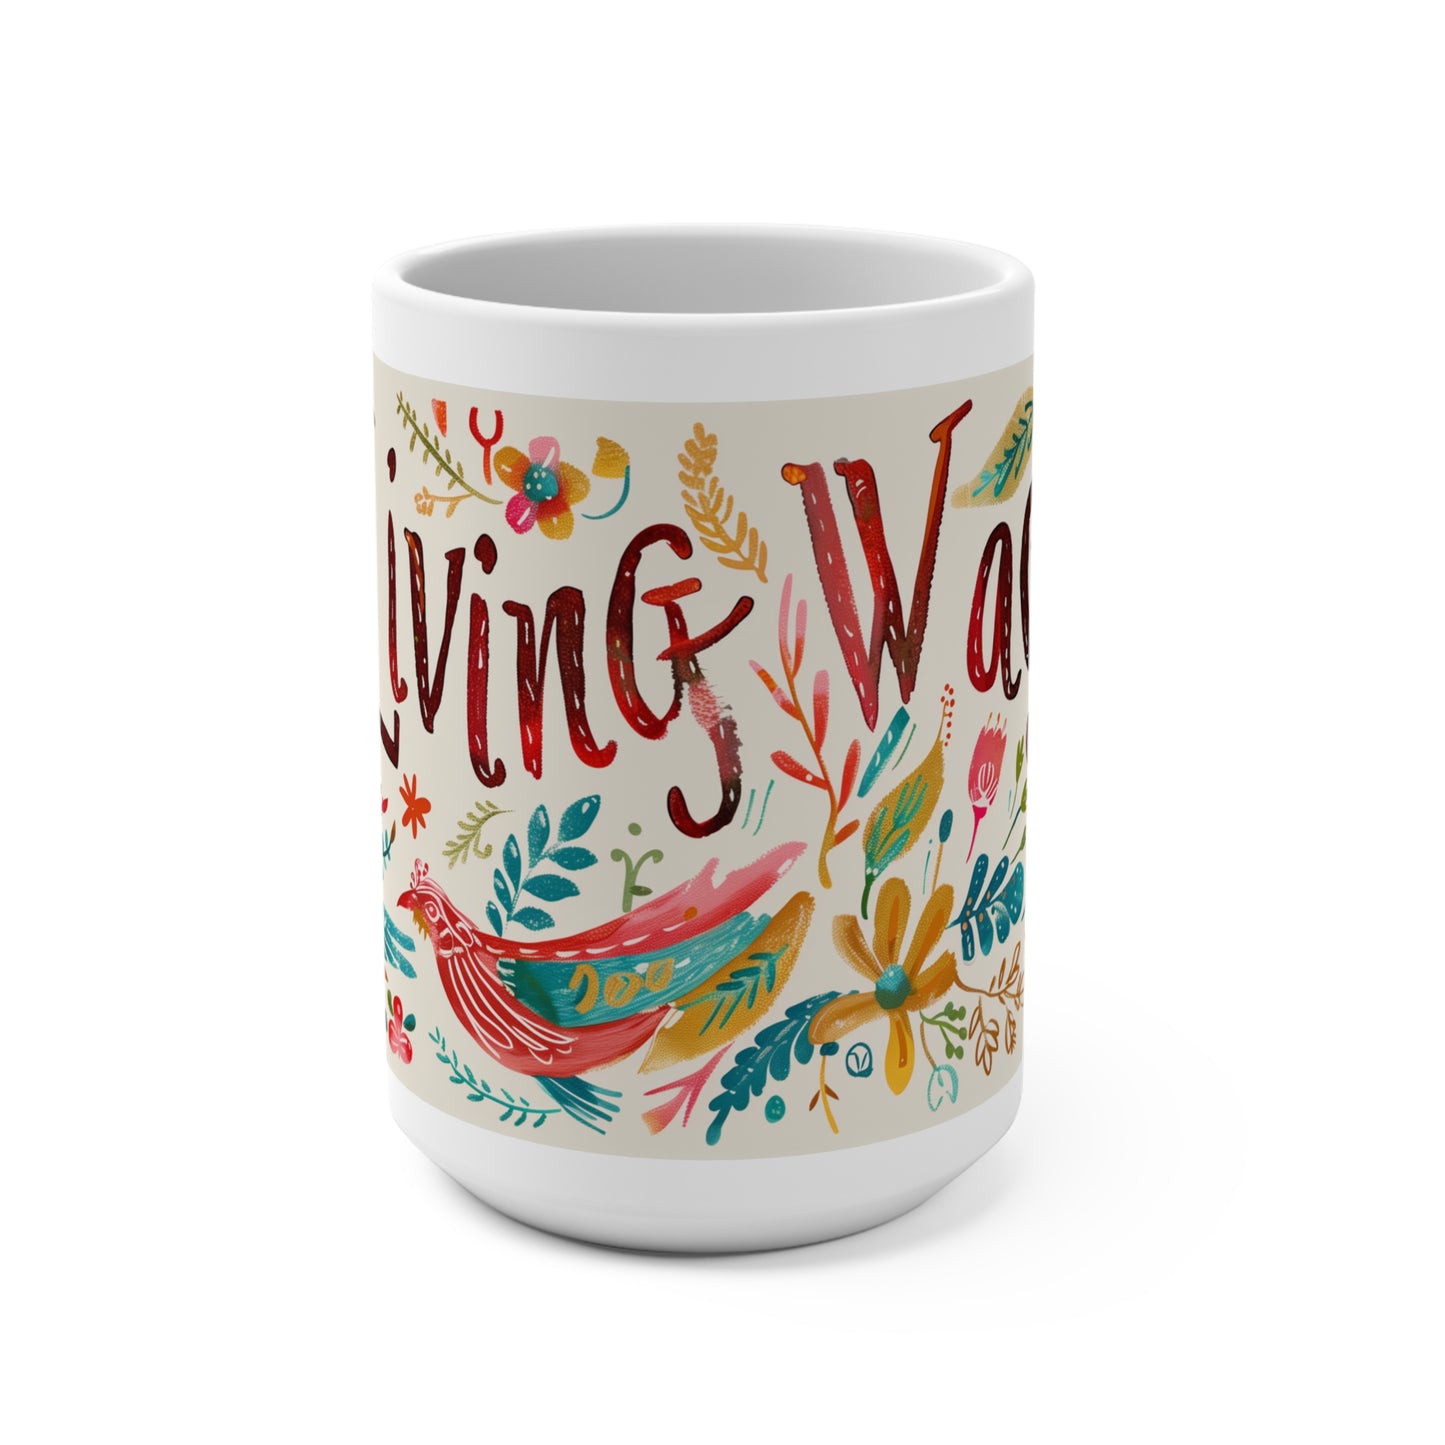 Living Wage Protest Coffee Mug (15oz) Political Mug 40 hours Should Pay the Bills! Labor Unite Activism Inspired by Cath Kidston